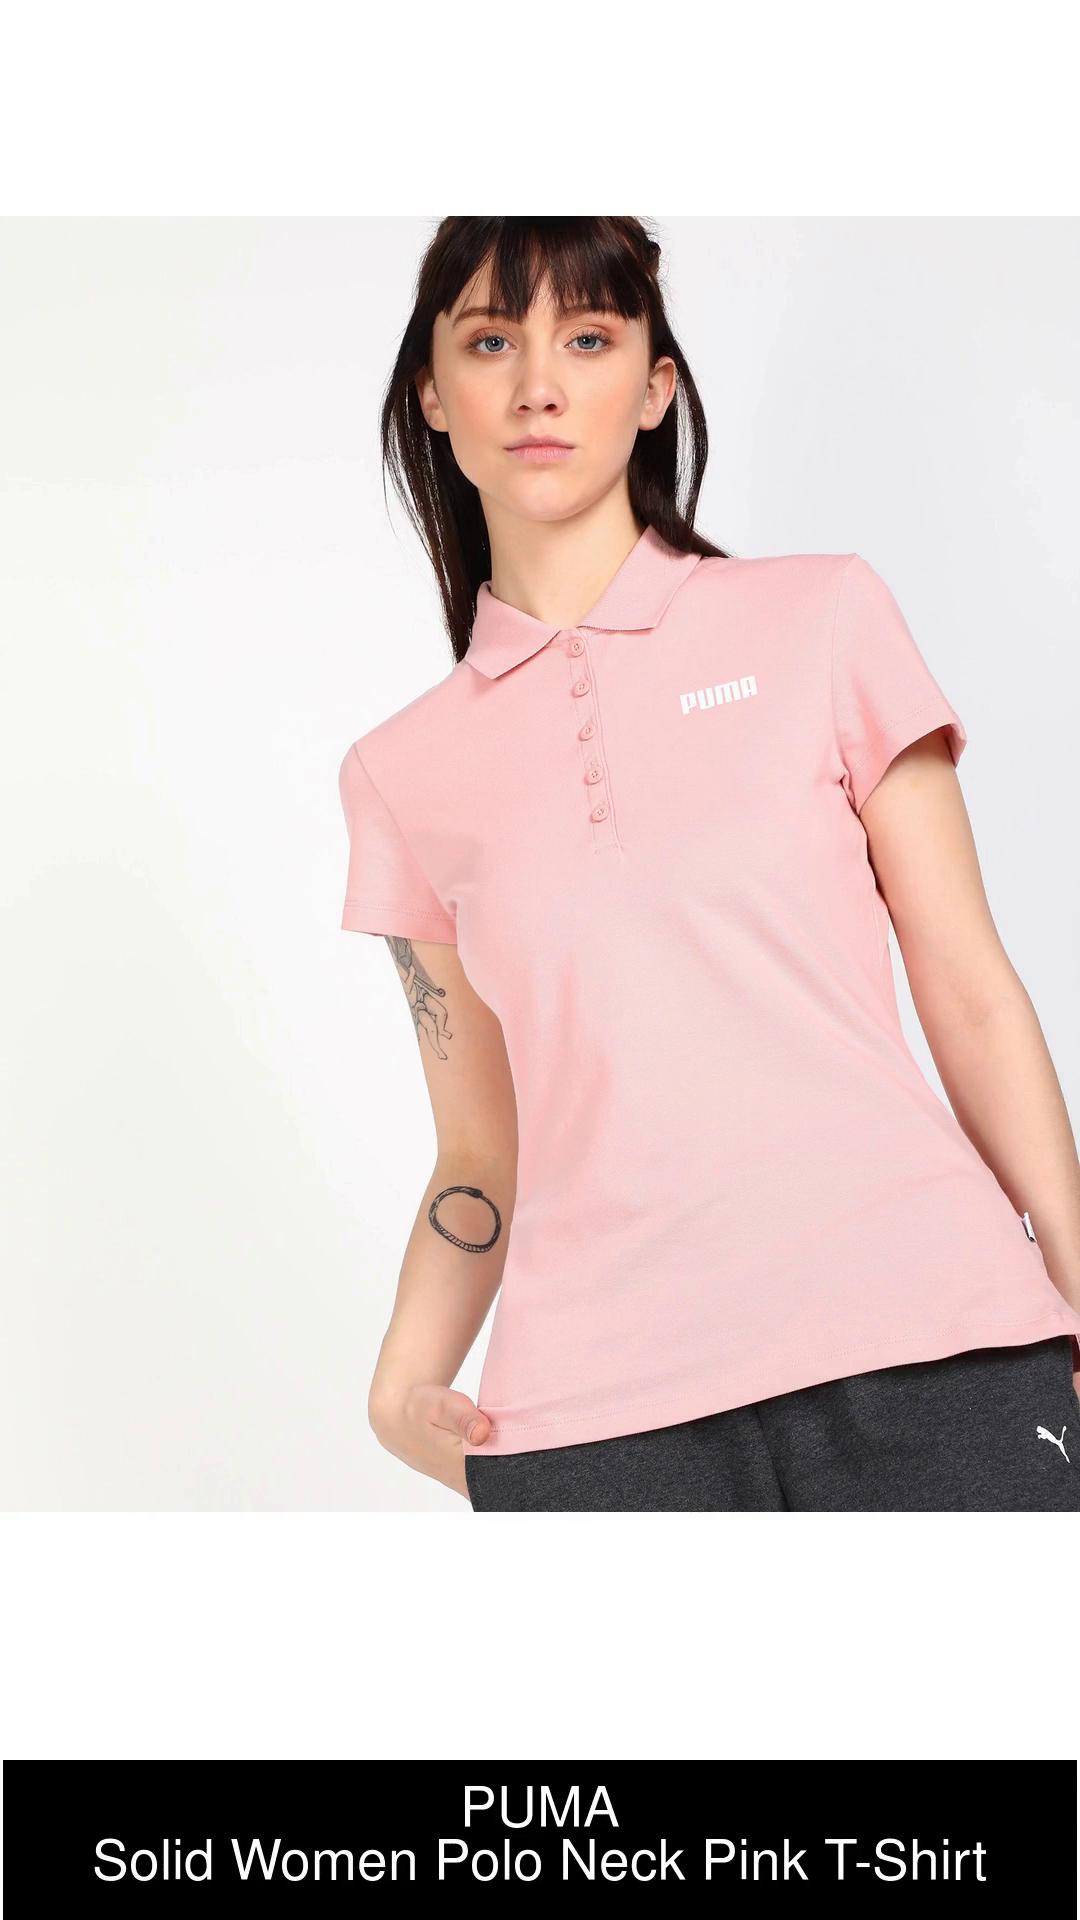 Neck Neck PUMA Prices Best T-Shirt Buy Pink Solid Polo India Women in at Polo Pink - Women Solid Online PUMA T-Shirt